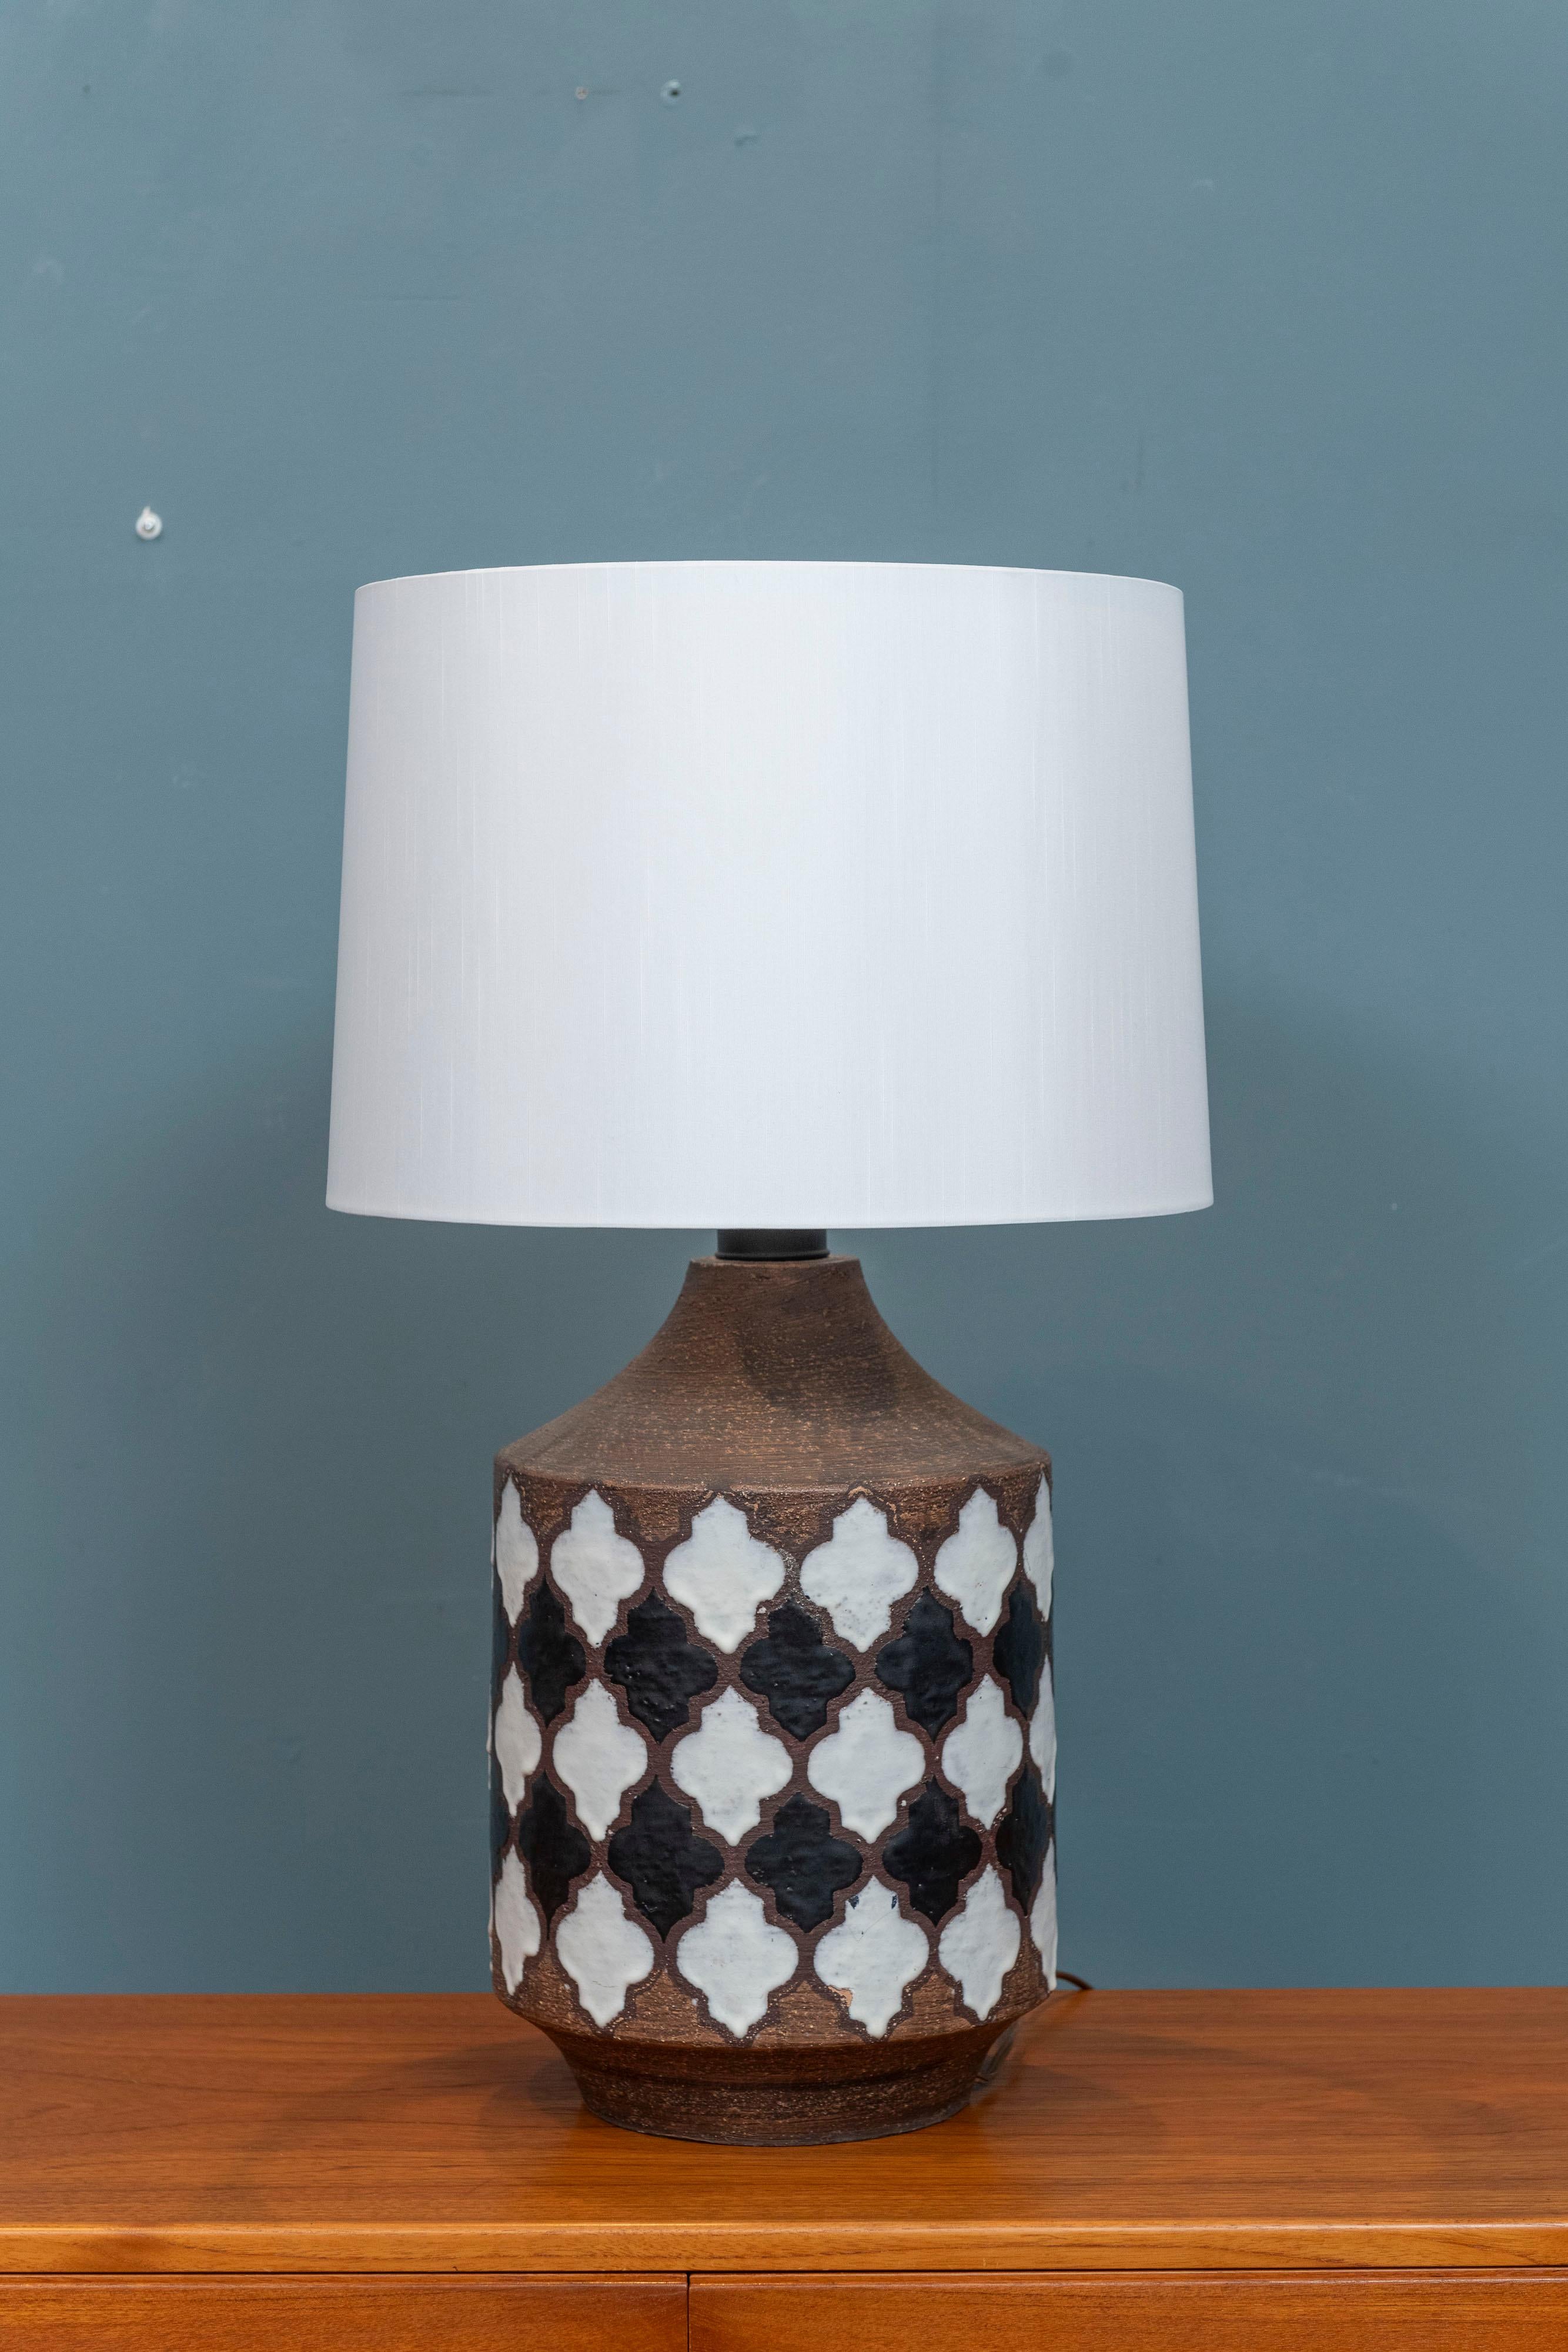 Bitossi ceramic table lamp, Italy. Moorish black and white pattern design on an earthen colored ceramic background, stylish yet grounded. Large size and pattern echoes the 1970's, perfect for a beach or desert climate interior. In very good original